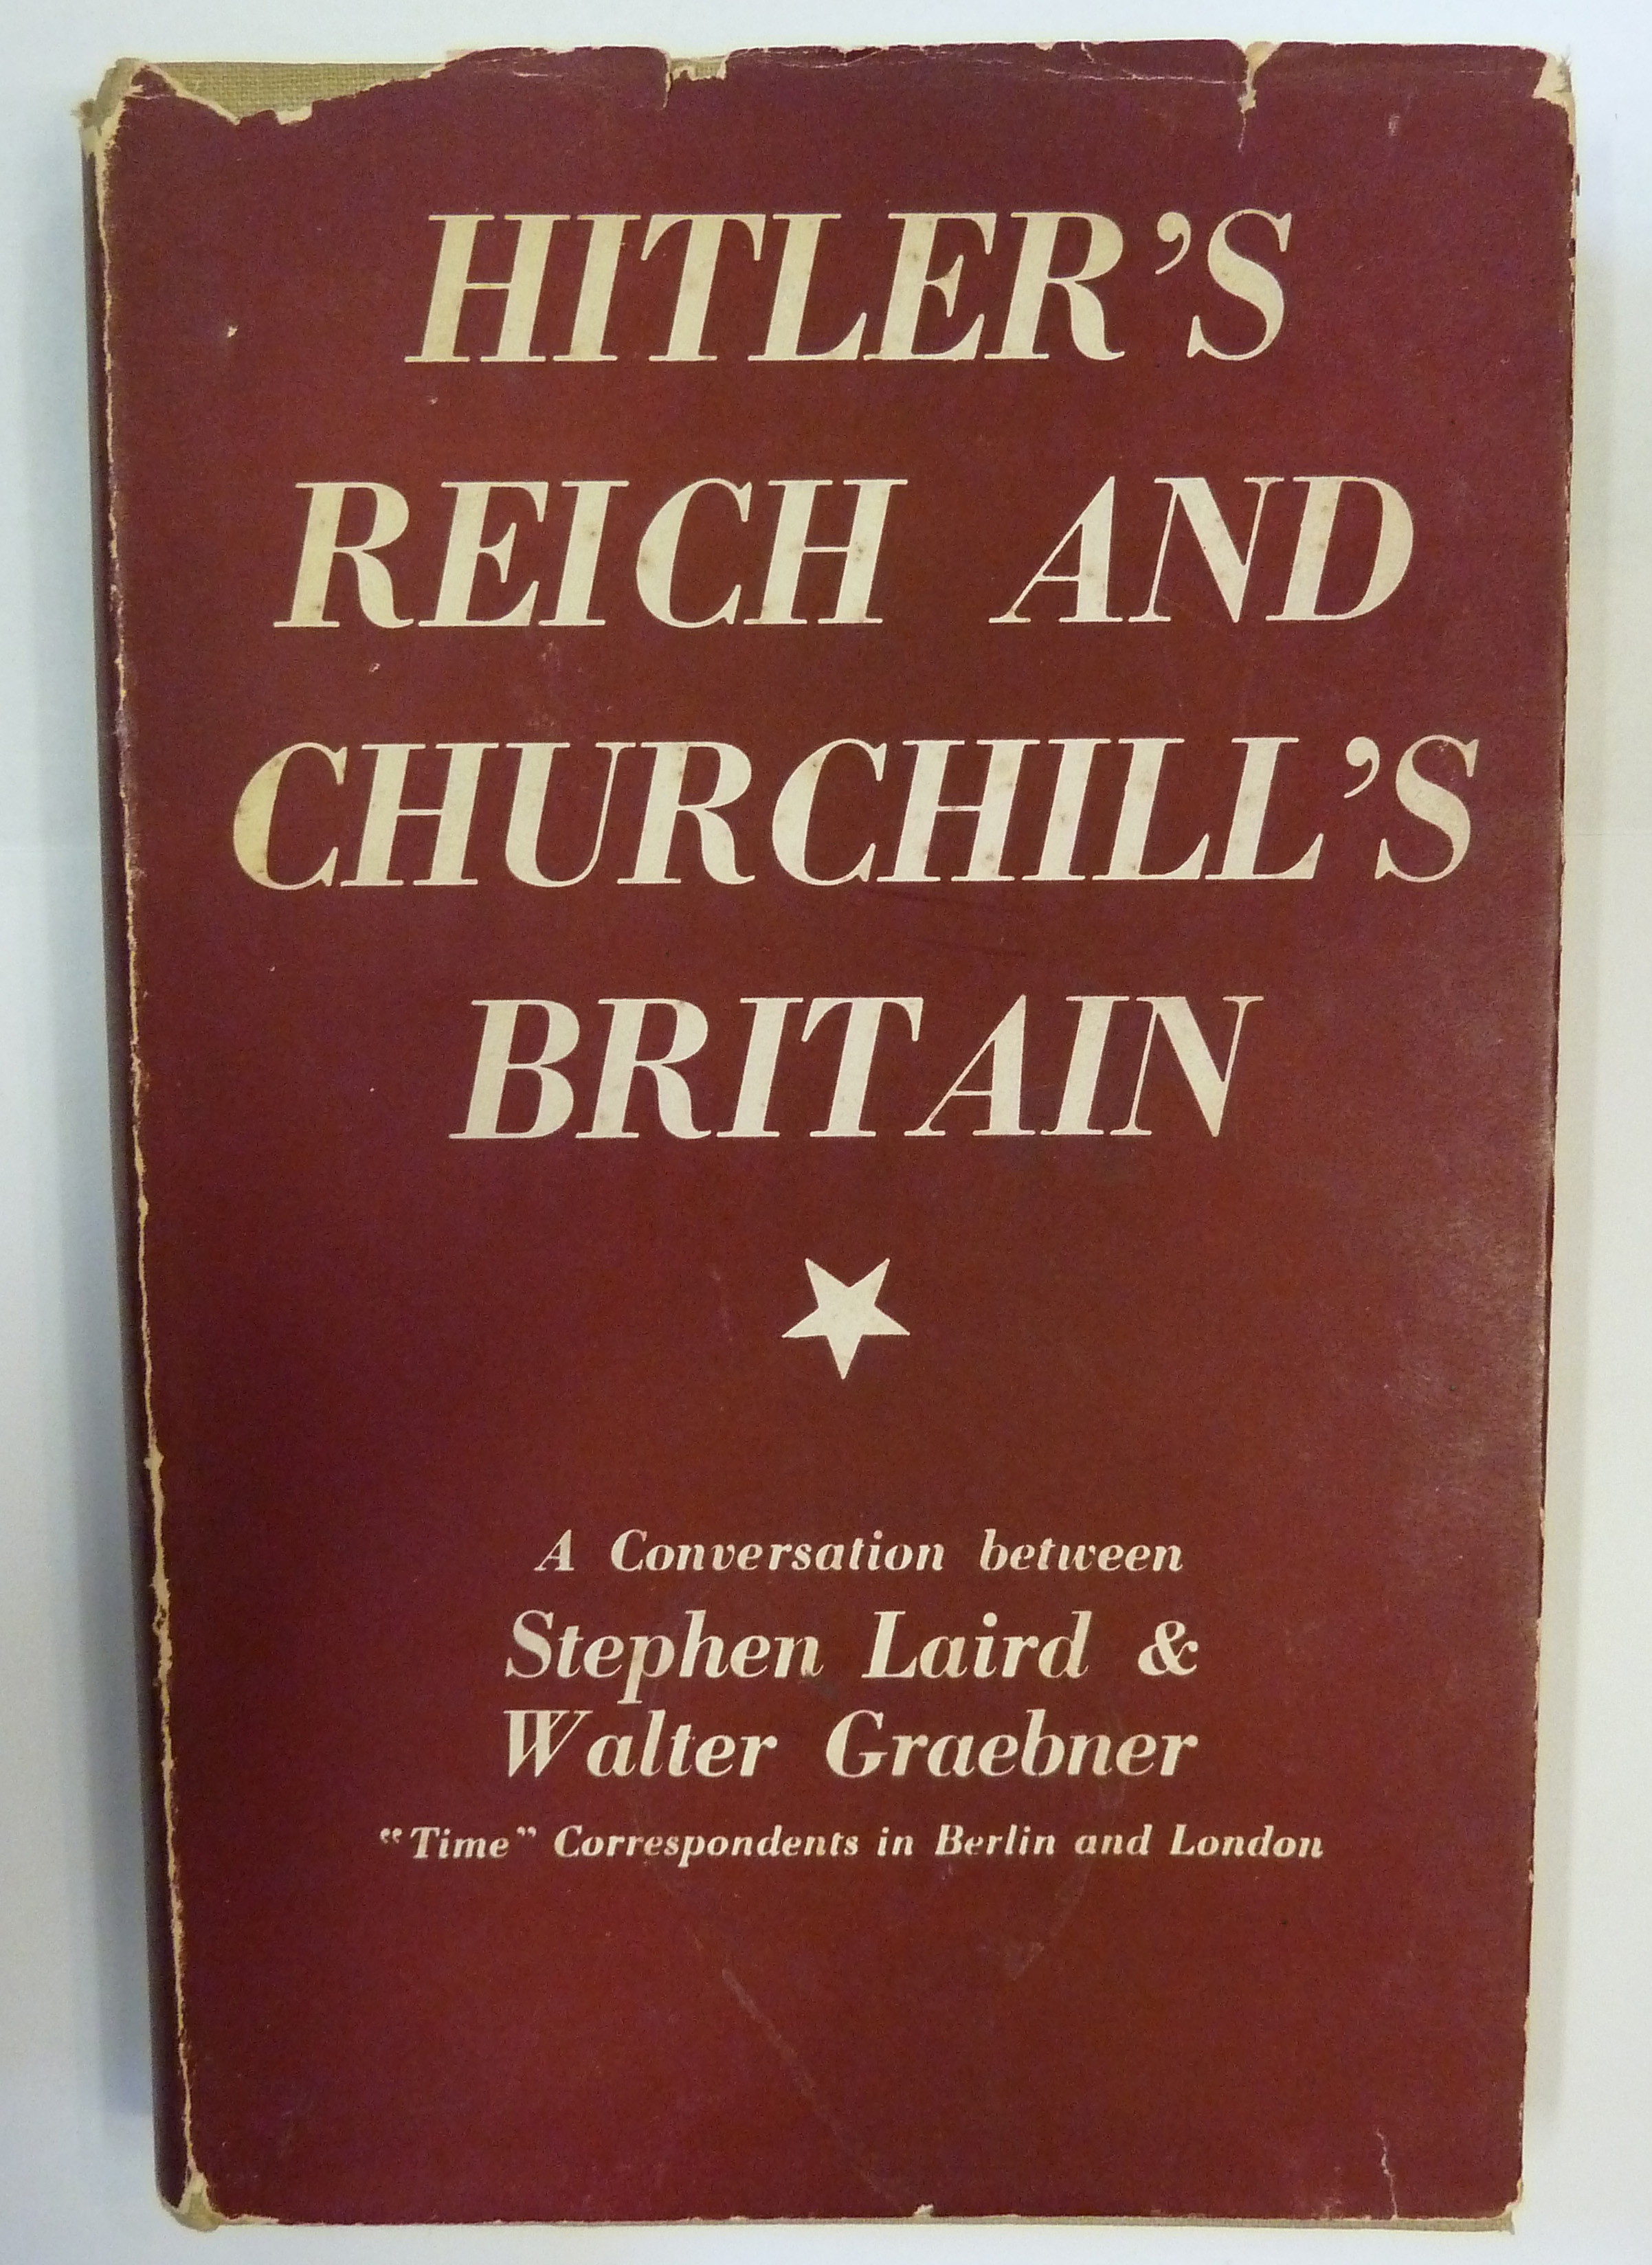 Hitler's Reich And Churchill's Britain 